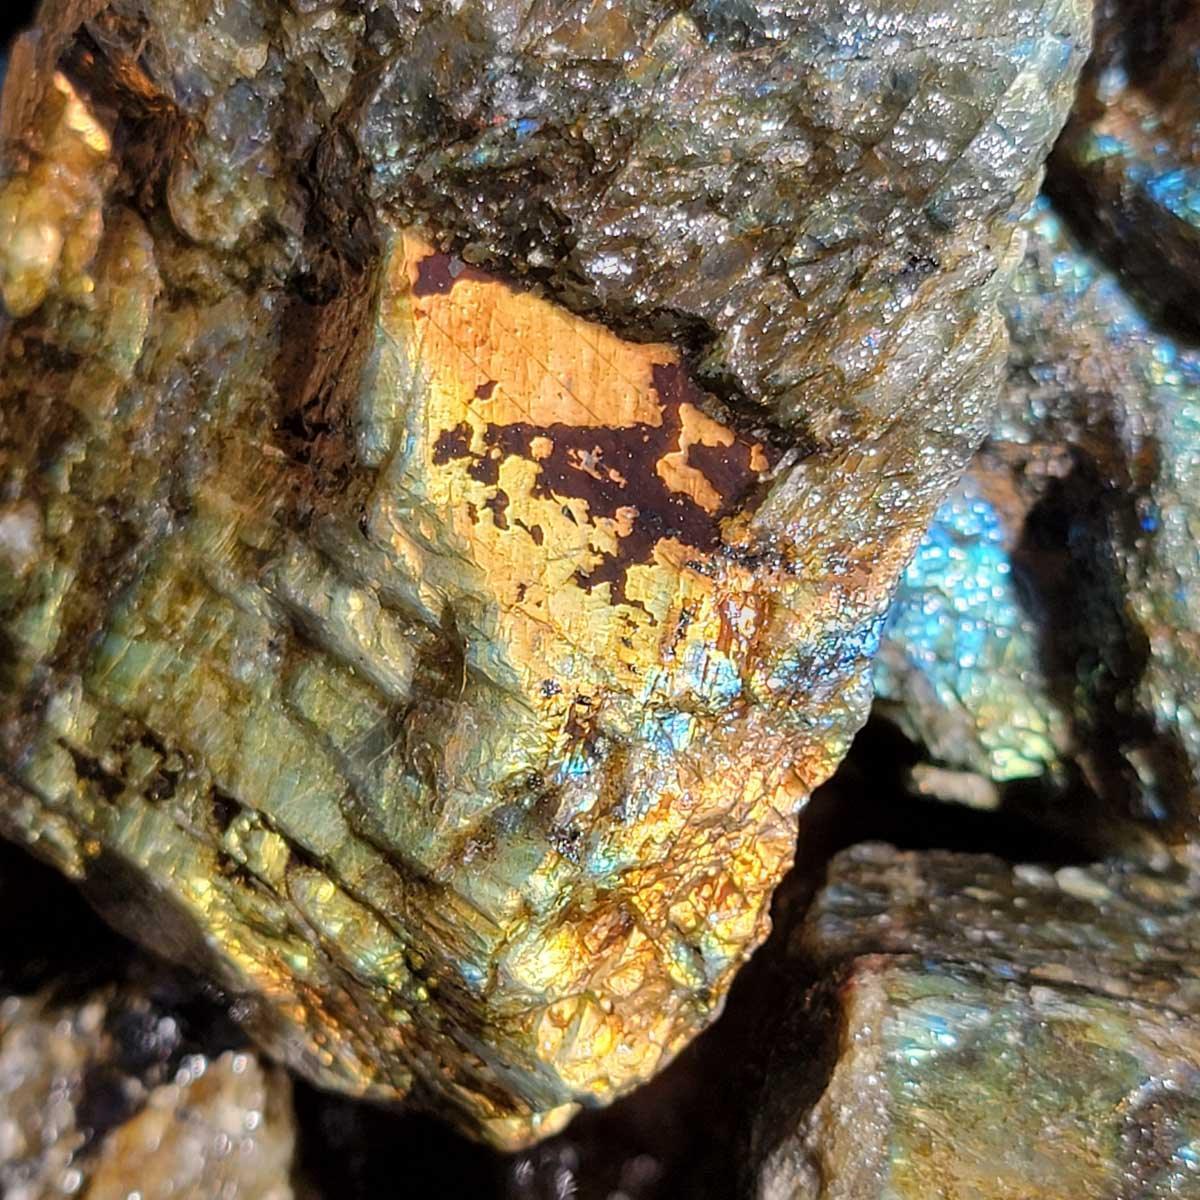 High Grade Labradorite Cutting Rough Batch with Great Flash! - LapidaryCentral